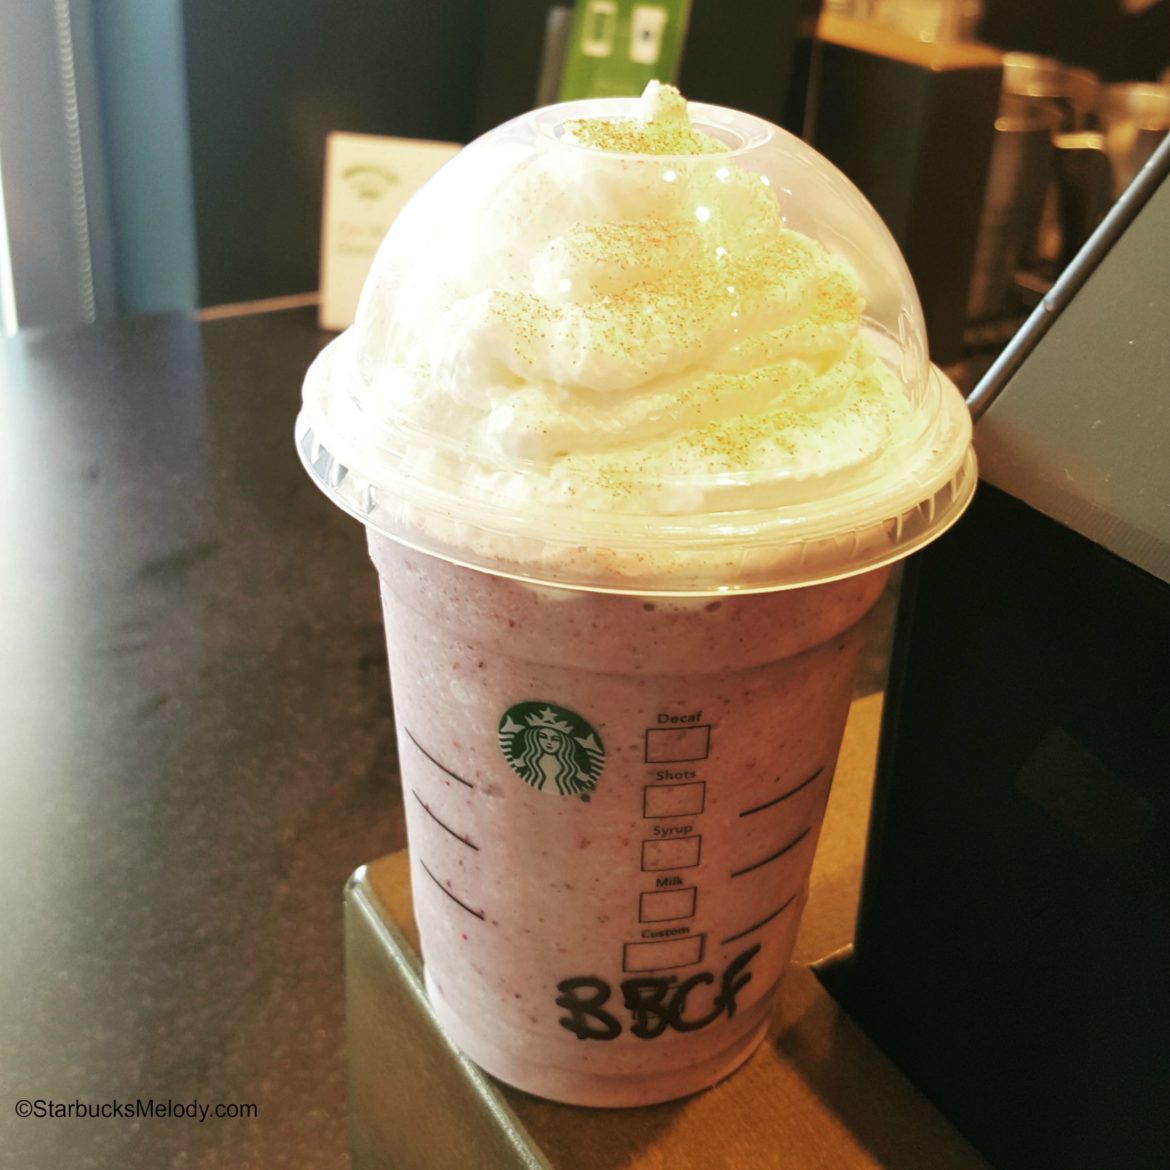 THE SECRET BLACKBERRY CREME FRAPPUCCINO: Frappuccino of the week!